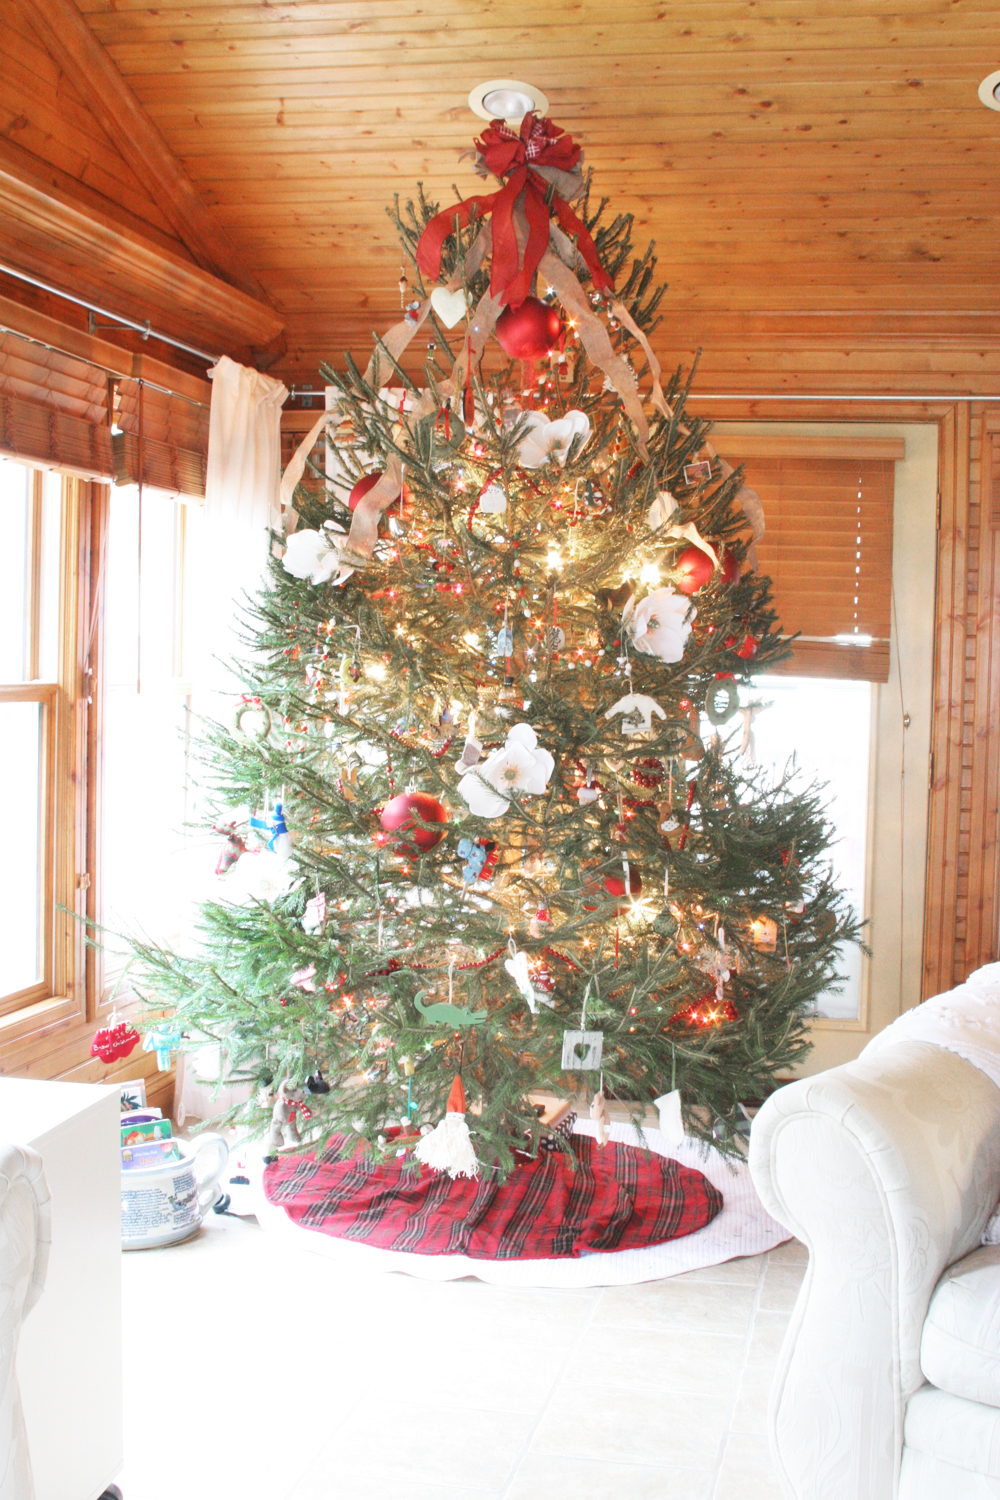 Farmhouse Christmas Home Tour, Rustic, Cottage by @CraftivityD